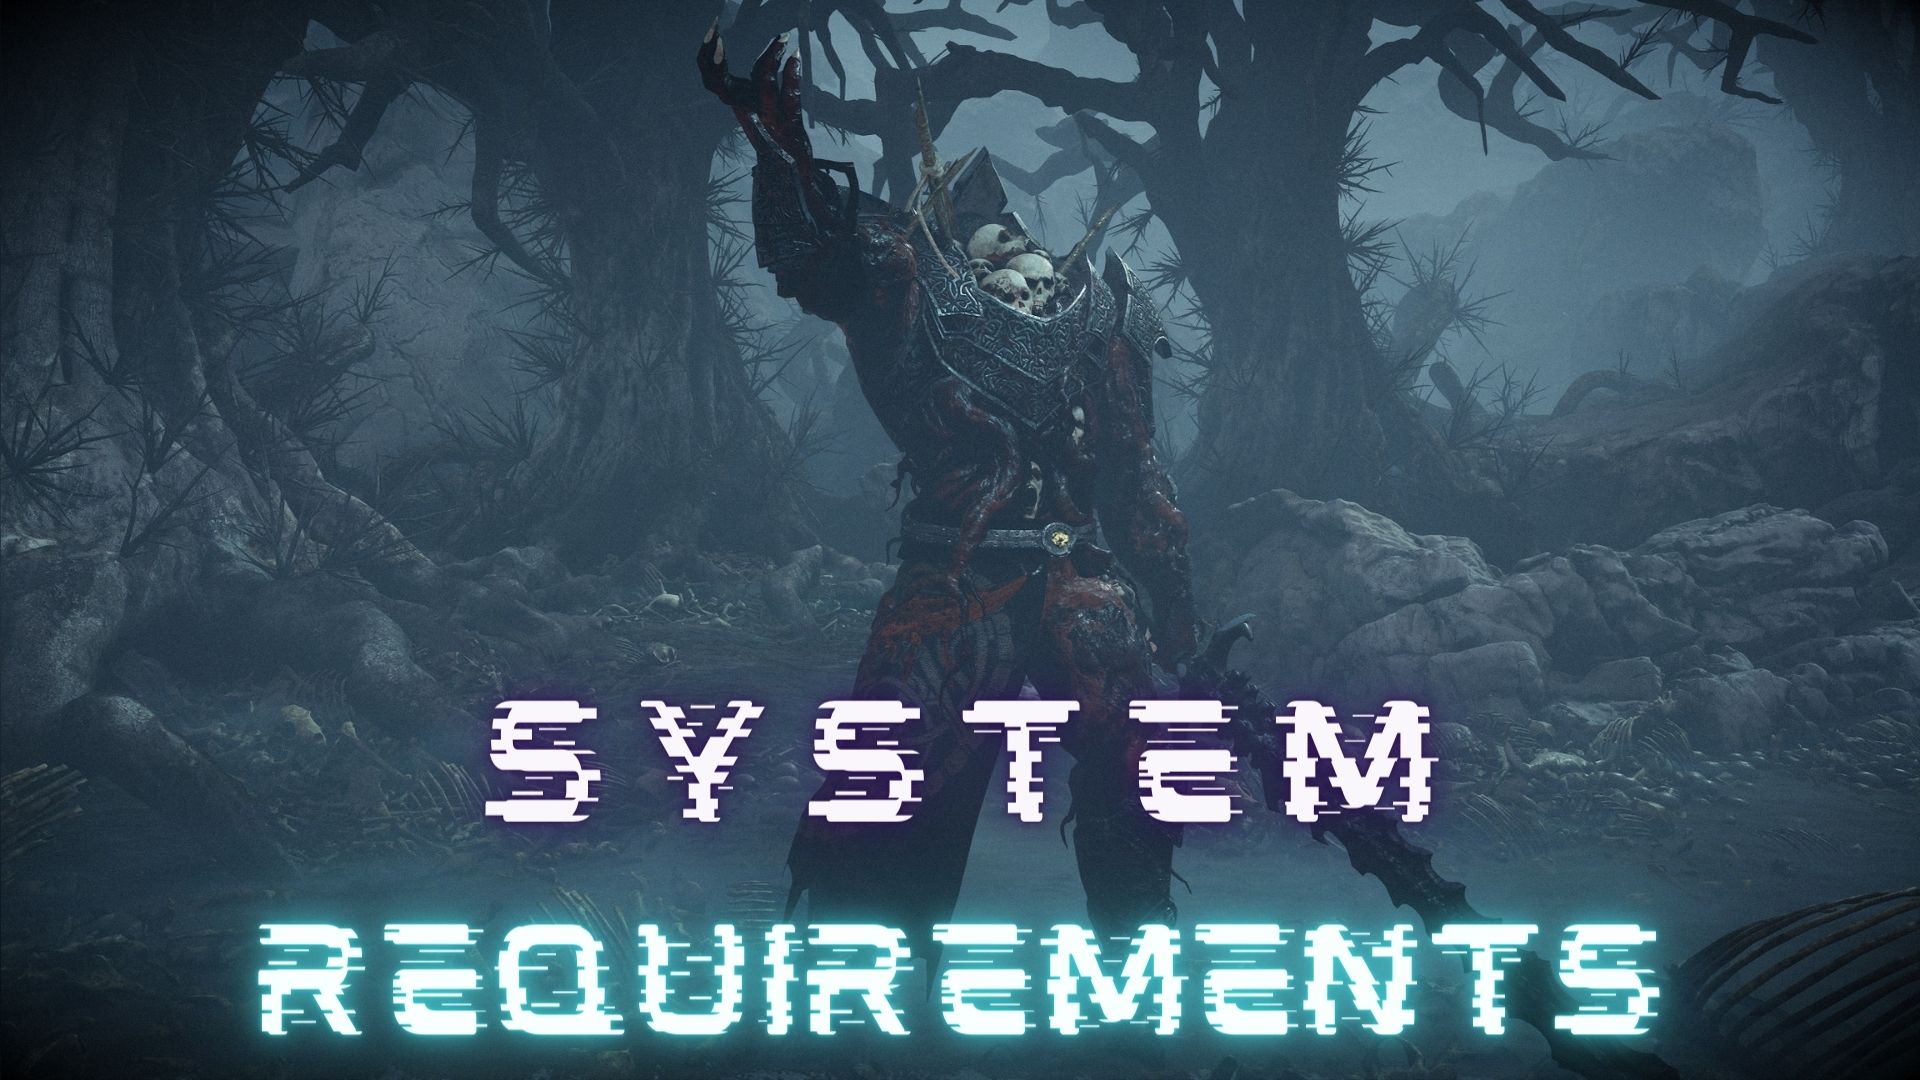 PC System Requirements for King Arthur Knight's Tale